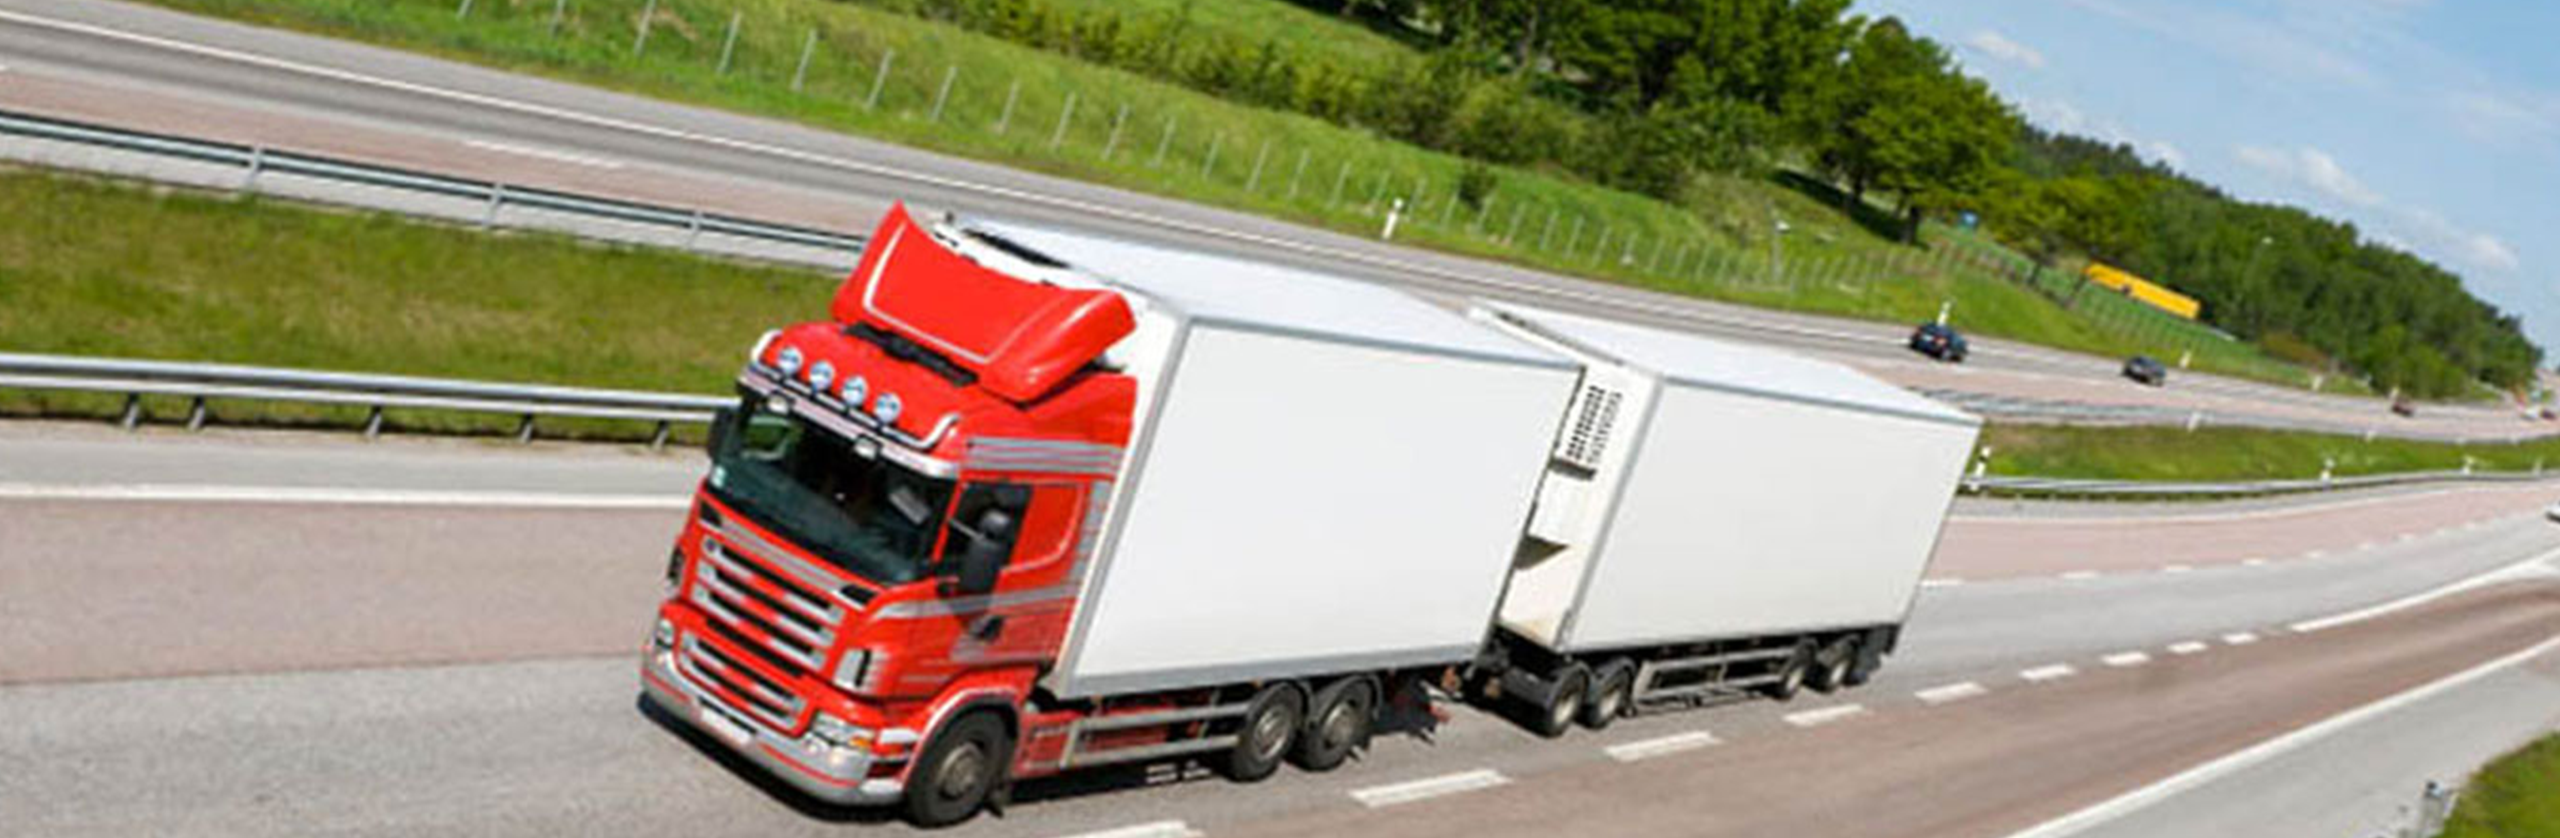 urgent railway parcel services in delhi, urgent railway Parcel services in Mumbai, urgent railway parcel services in Kolkata, guwahati train parcel services, packers and movers service provider delhi, best packers and movers services in delhi, packer and movers services door to door services, house hold shifting services in delhi, office shifting services provider in delhi